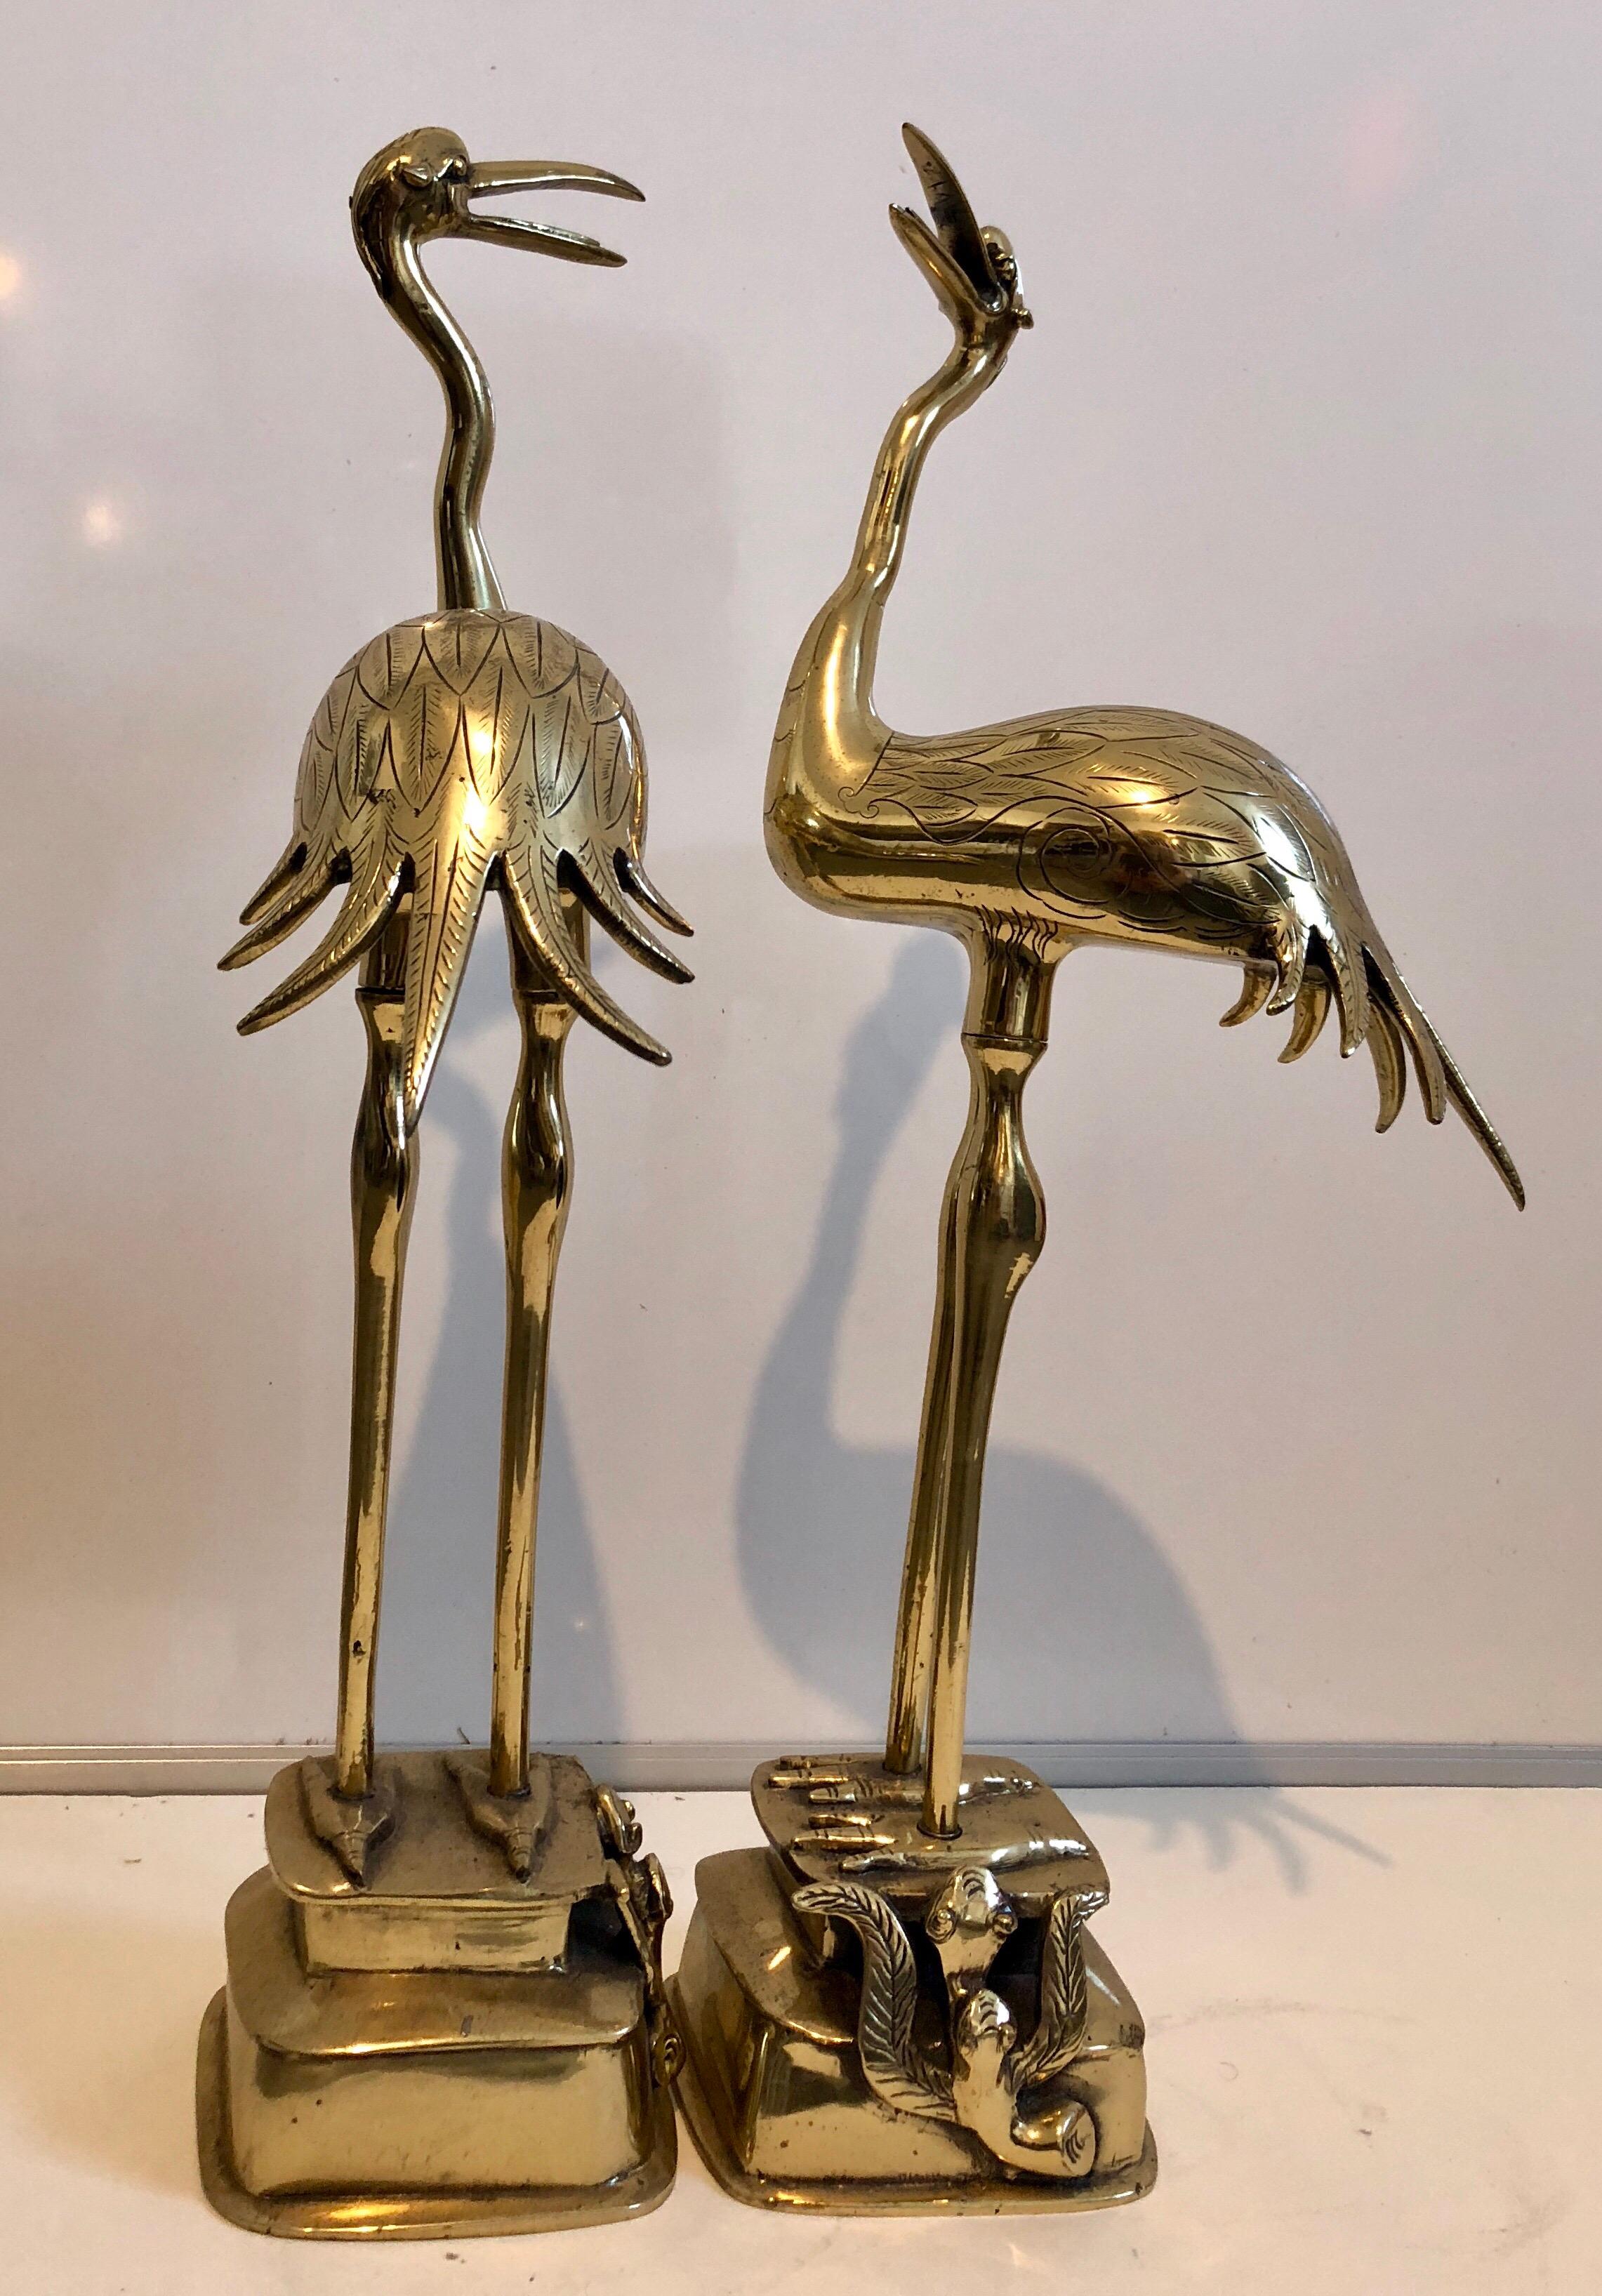 Pair Japanese 19th C. Polished Bronze Sculpture Cranes Pricket Candlesticks - Gold Still-Life Sculpture by Unknown